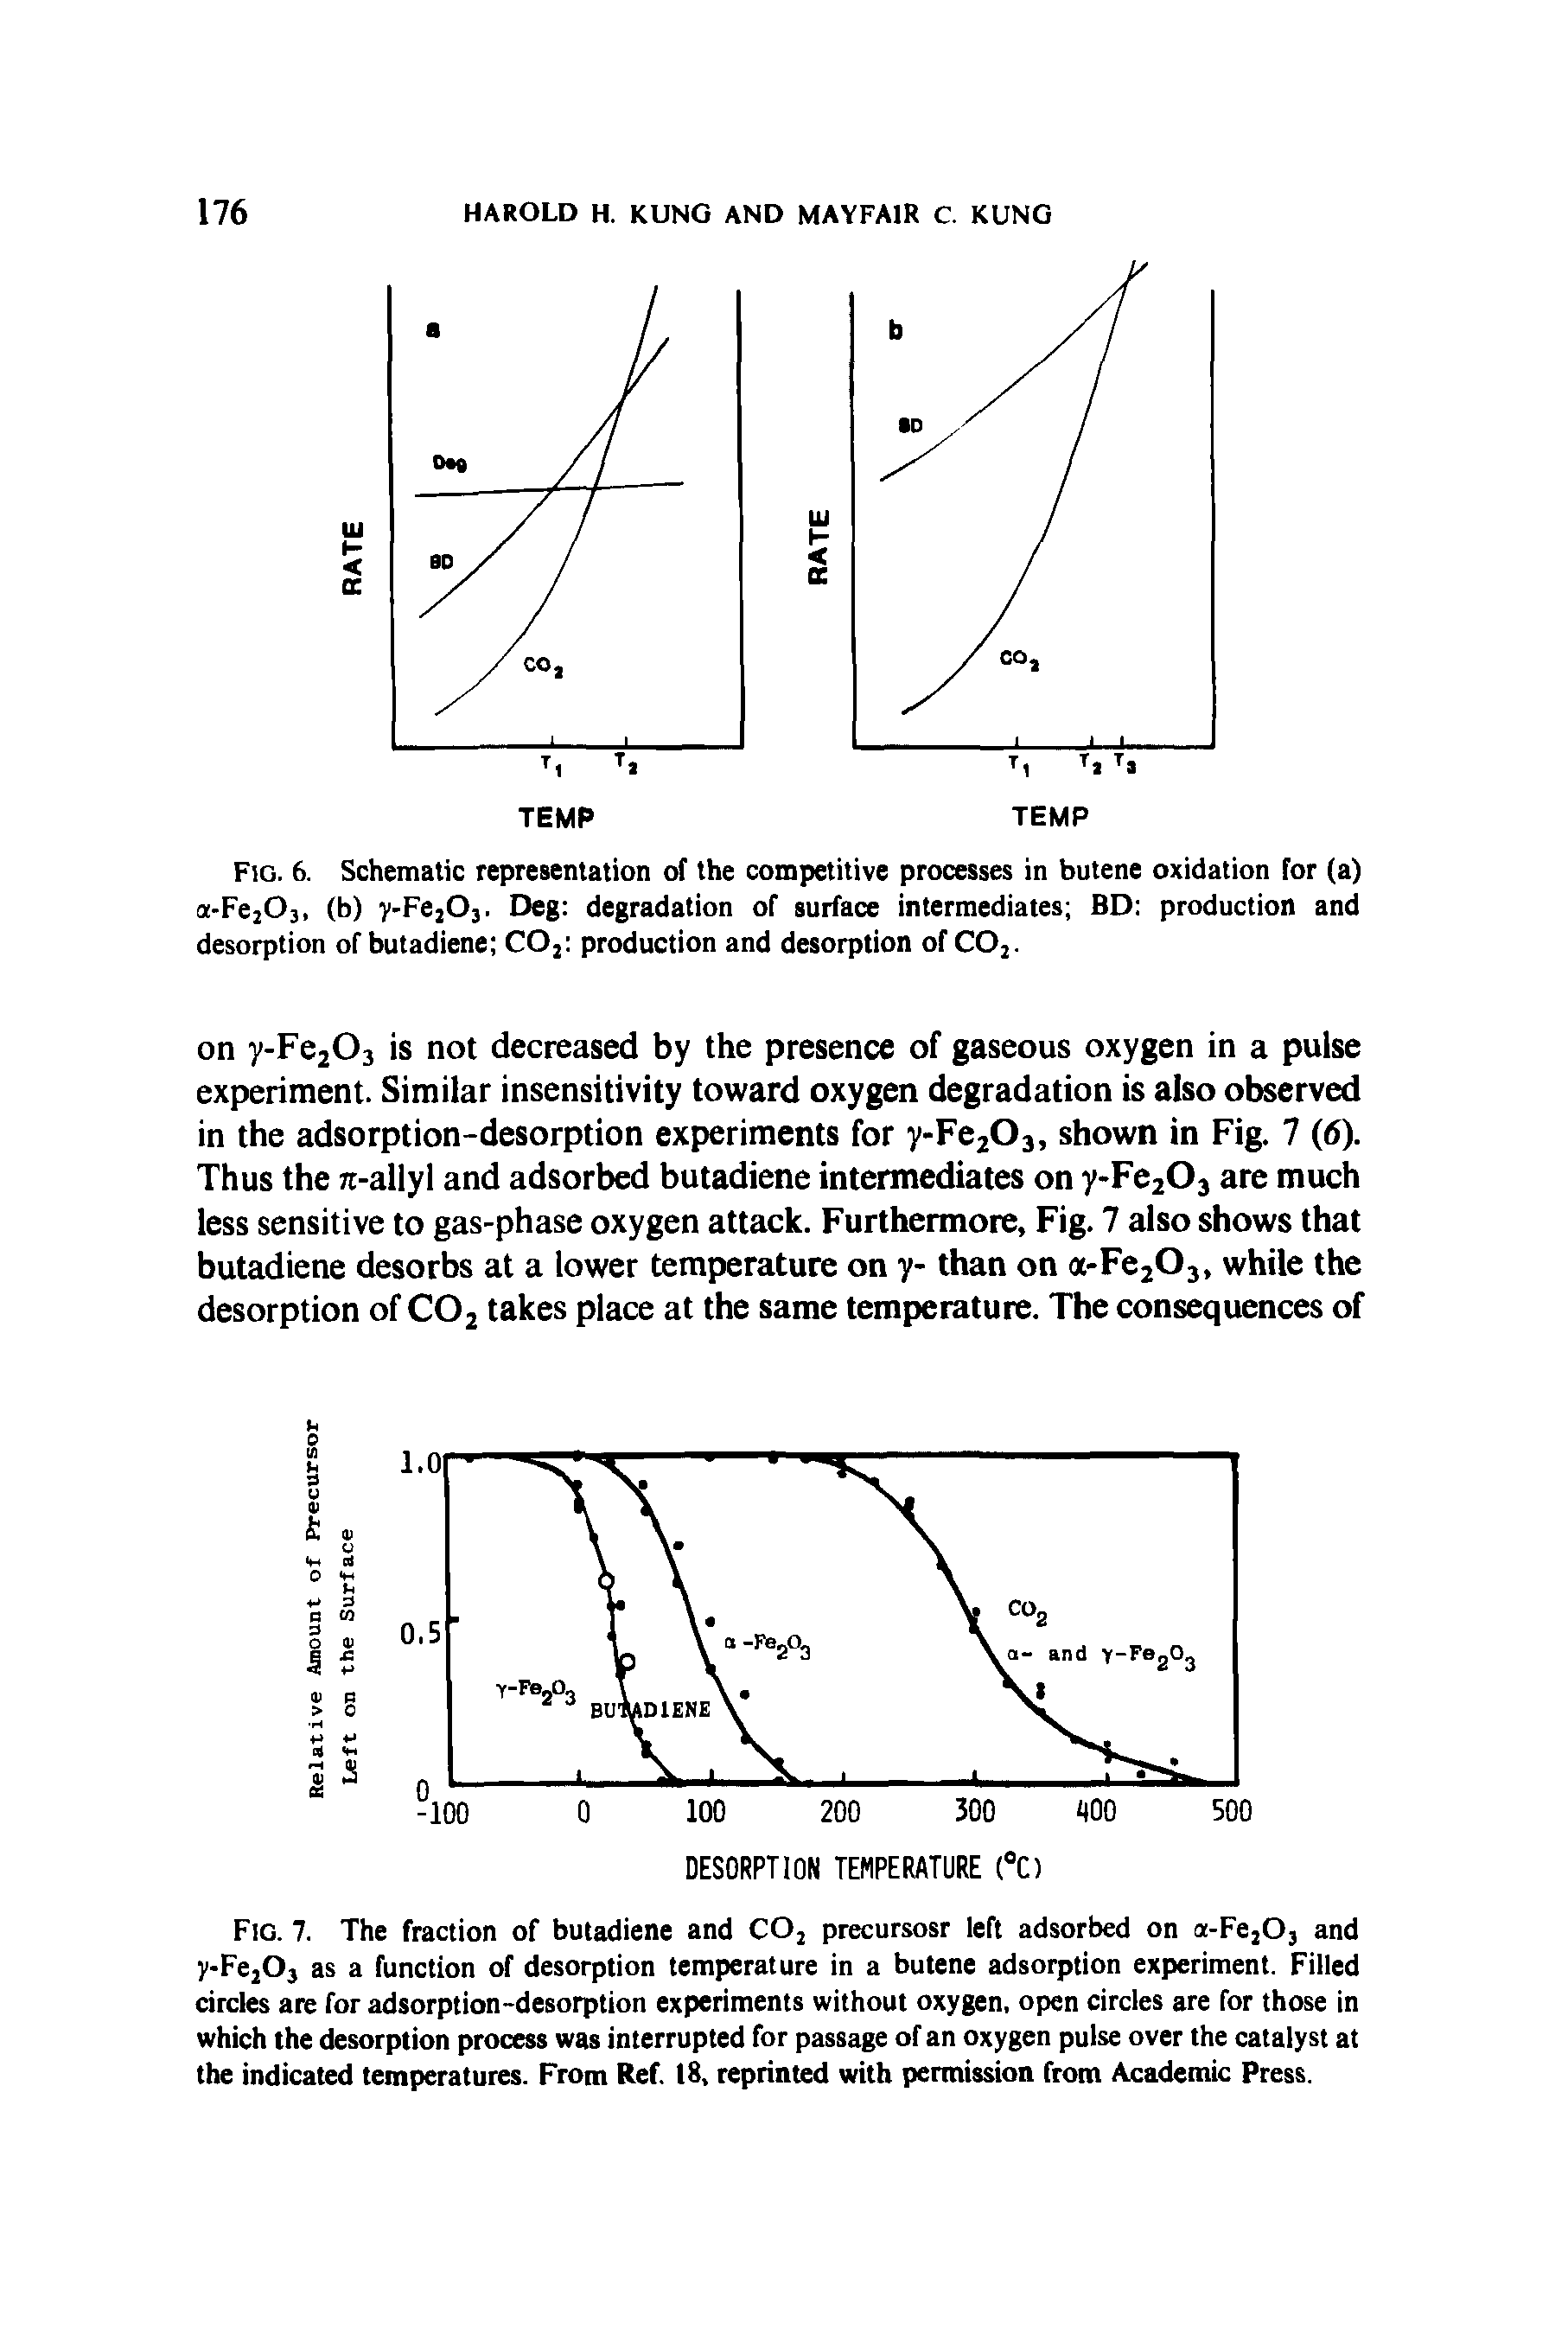 Fig. 6. Schematic representation of the competitive processes in butene oxidation for (a) a-Fe203, (b) y-Fe203. Deg degradation of surface intermediates BD production and desorption of butadiene C02 production and desorption of C02.